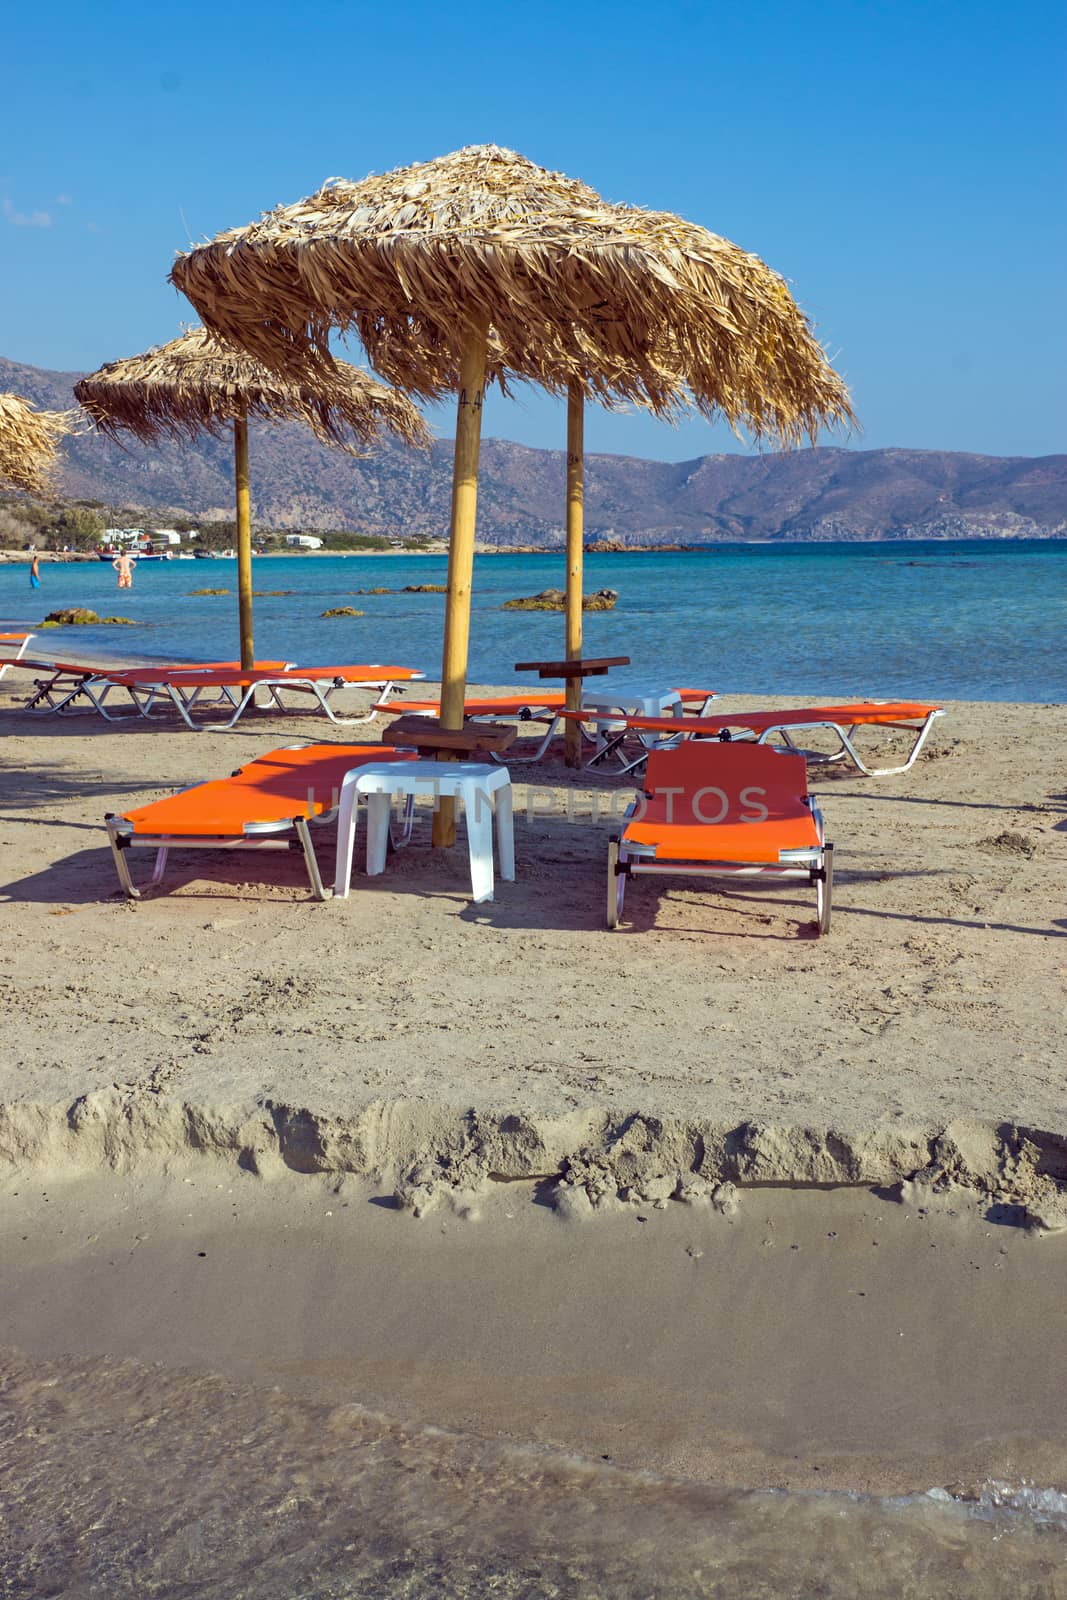 Parasols and sun loungers at a beautiful beach in Greece